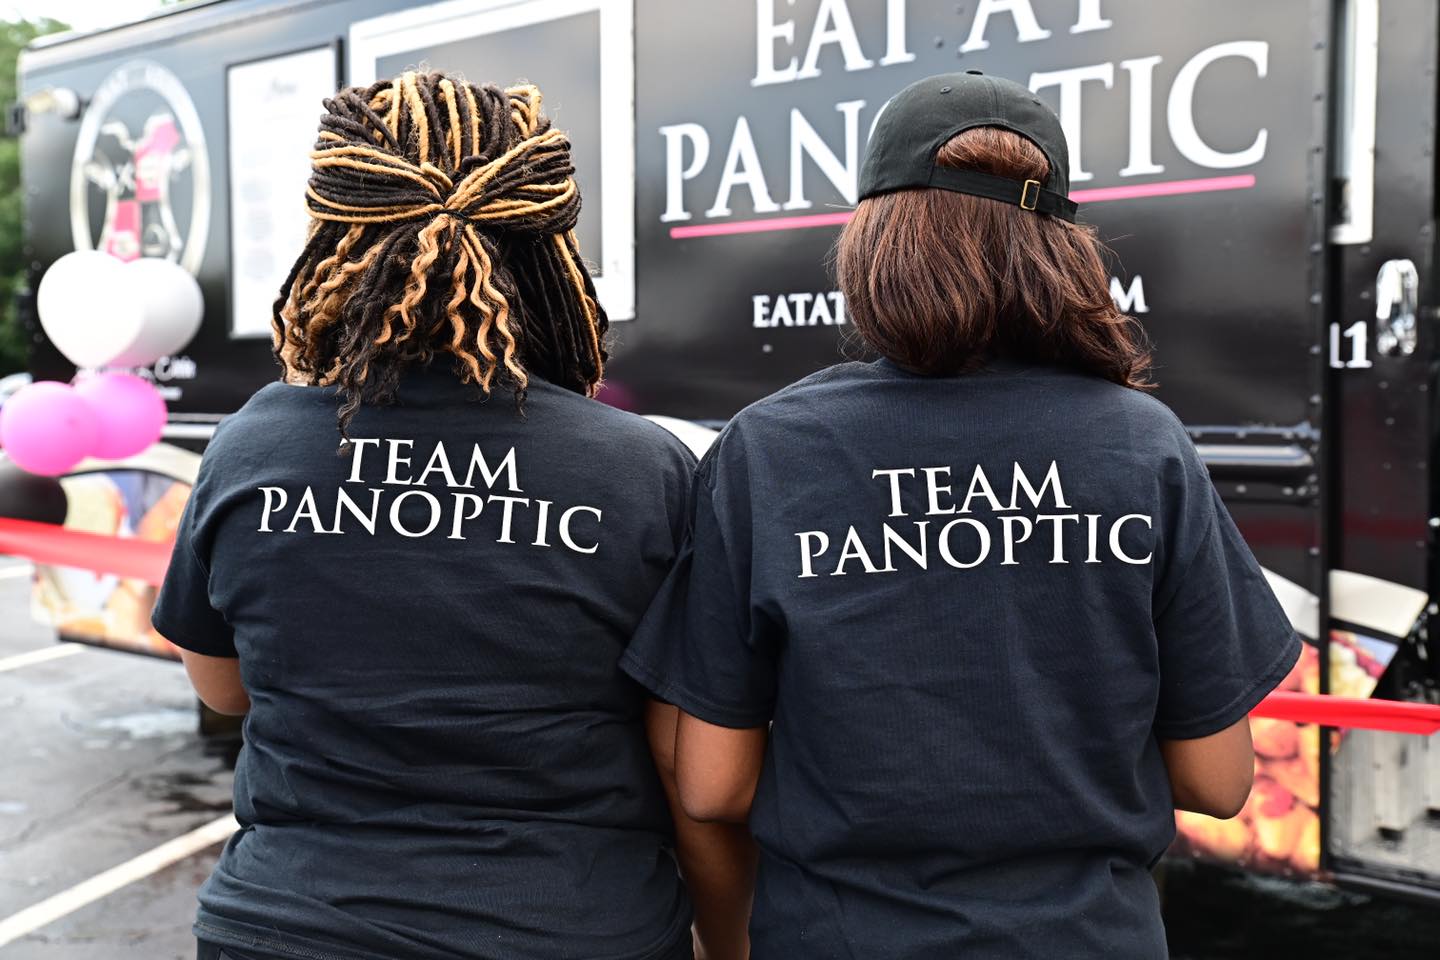 Team Panoptic will soon be opening a new restaurant in Irondale